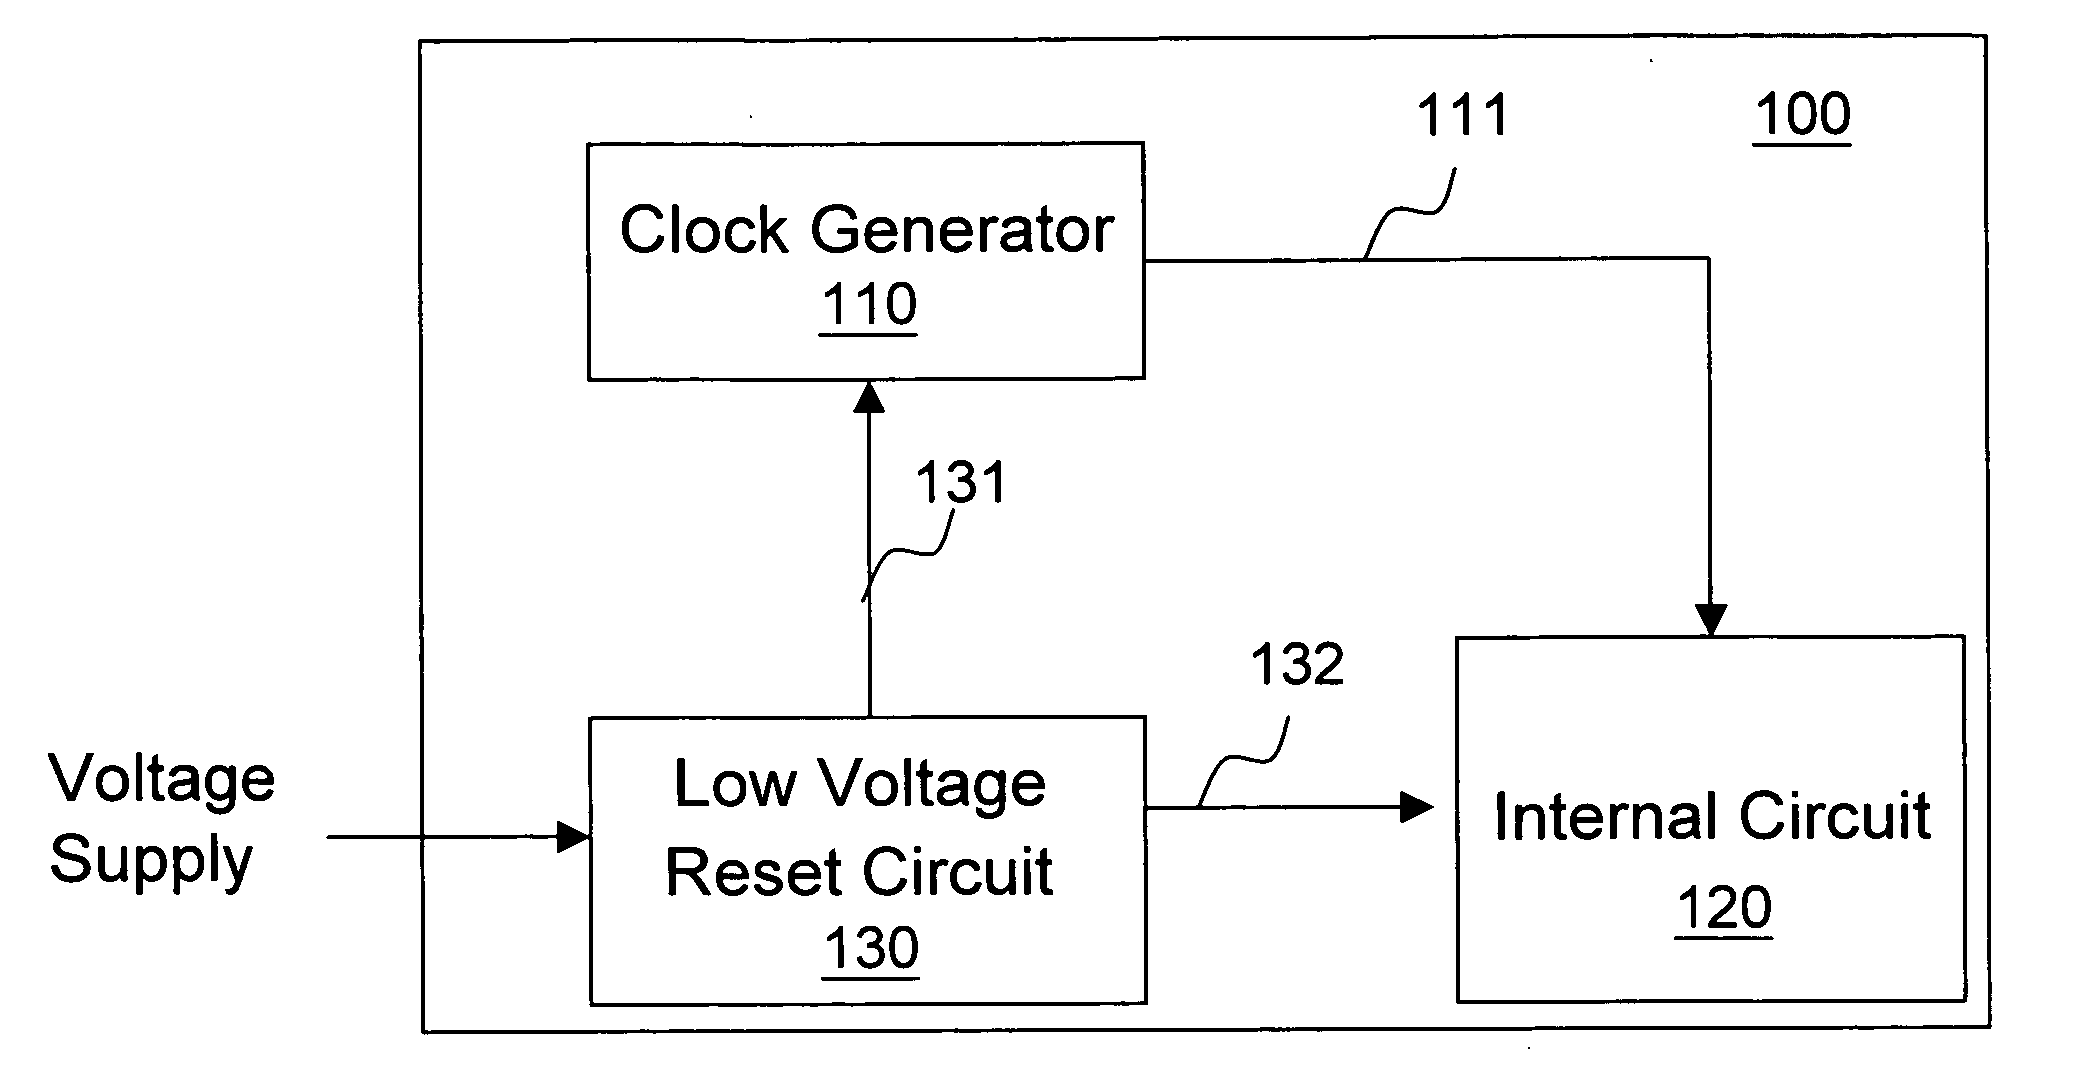 Circuit and method of adjusting system clock in low voltage detection, and low voltage reset circuit